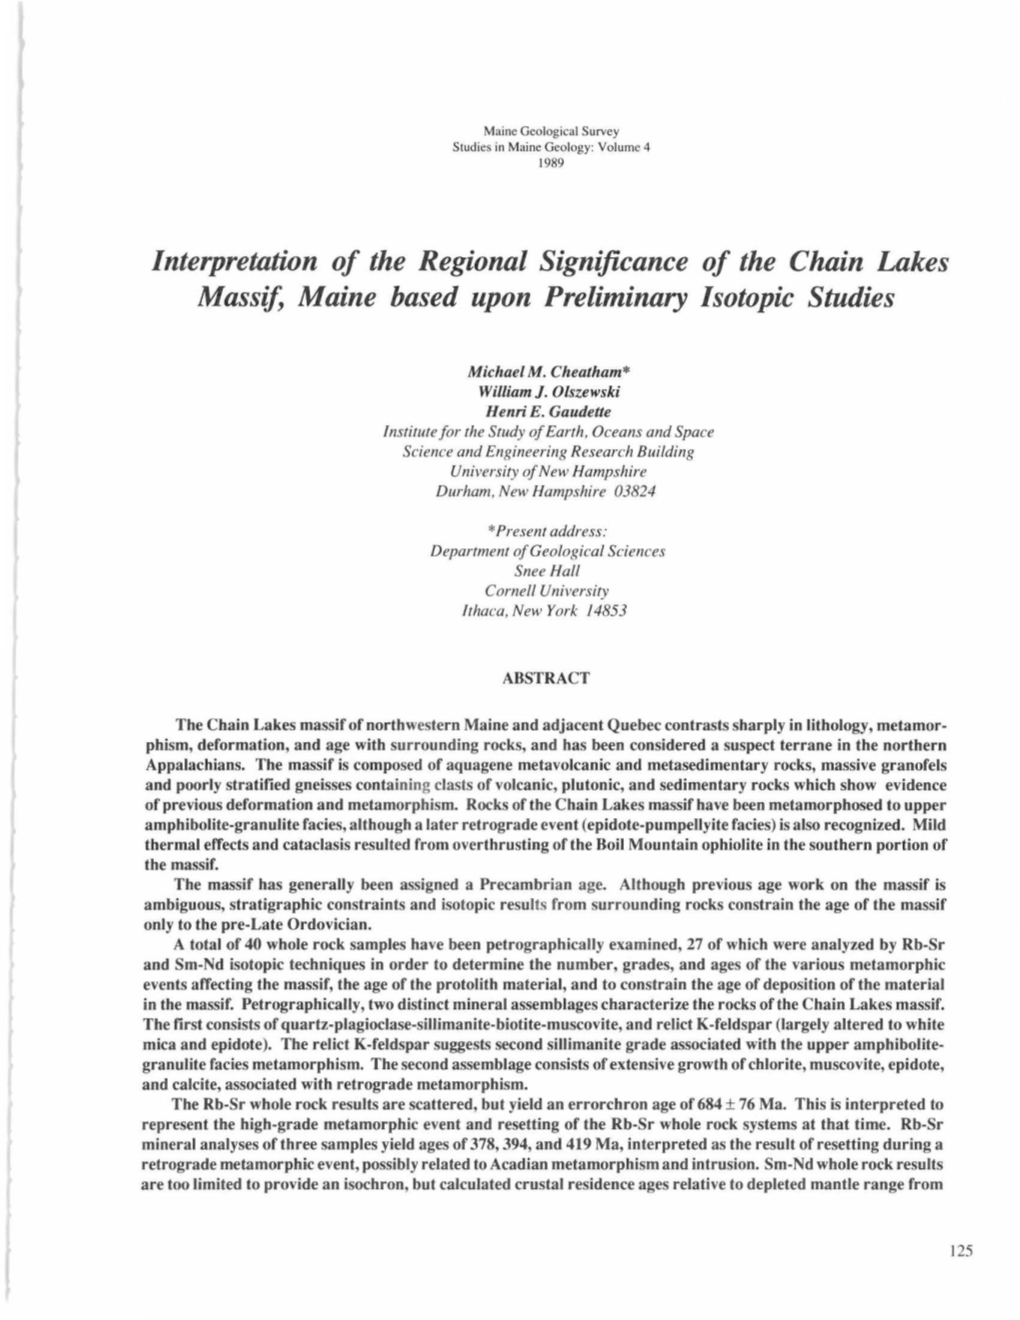 Interpretation of the Regional Significance of the Chain Lakes Massif, Maine Based Upon Preliminary Isotopic Studies